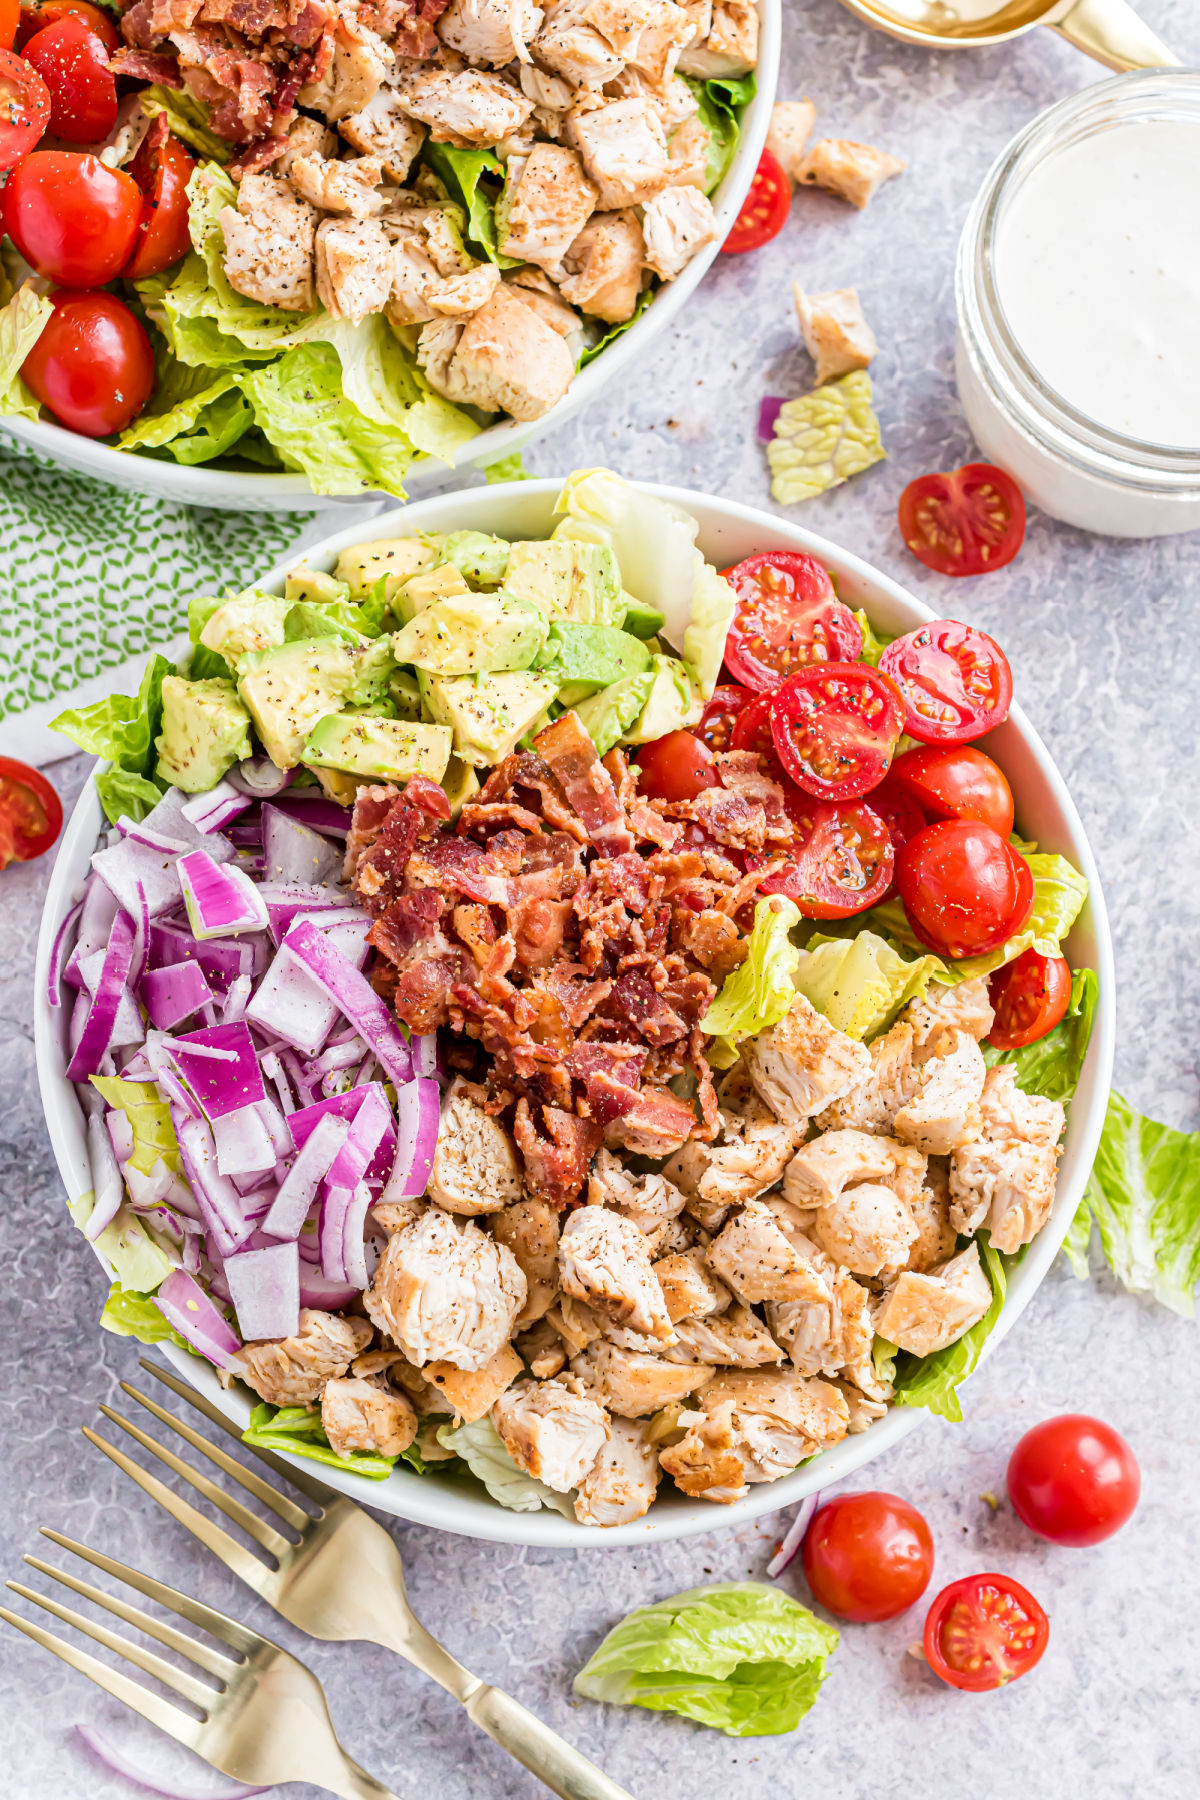 Chicken and bacon salad with avocado and tomatoes in a large bowl.